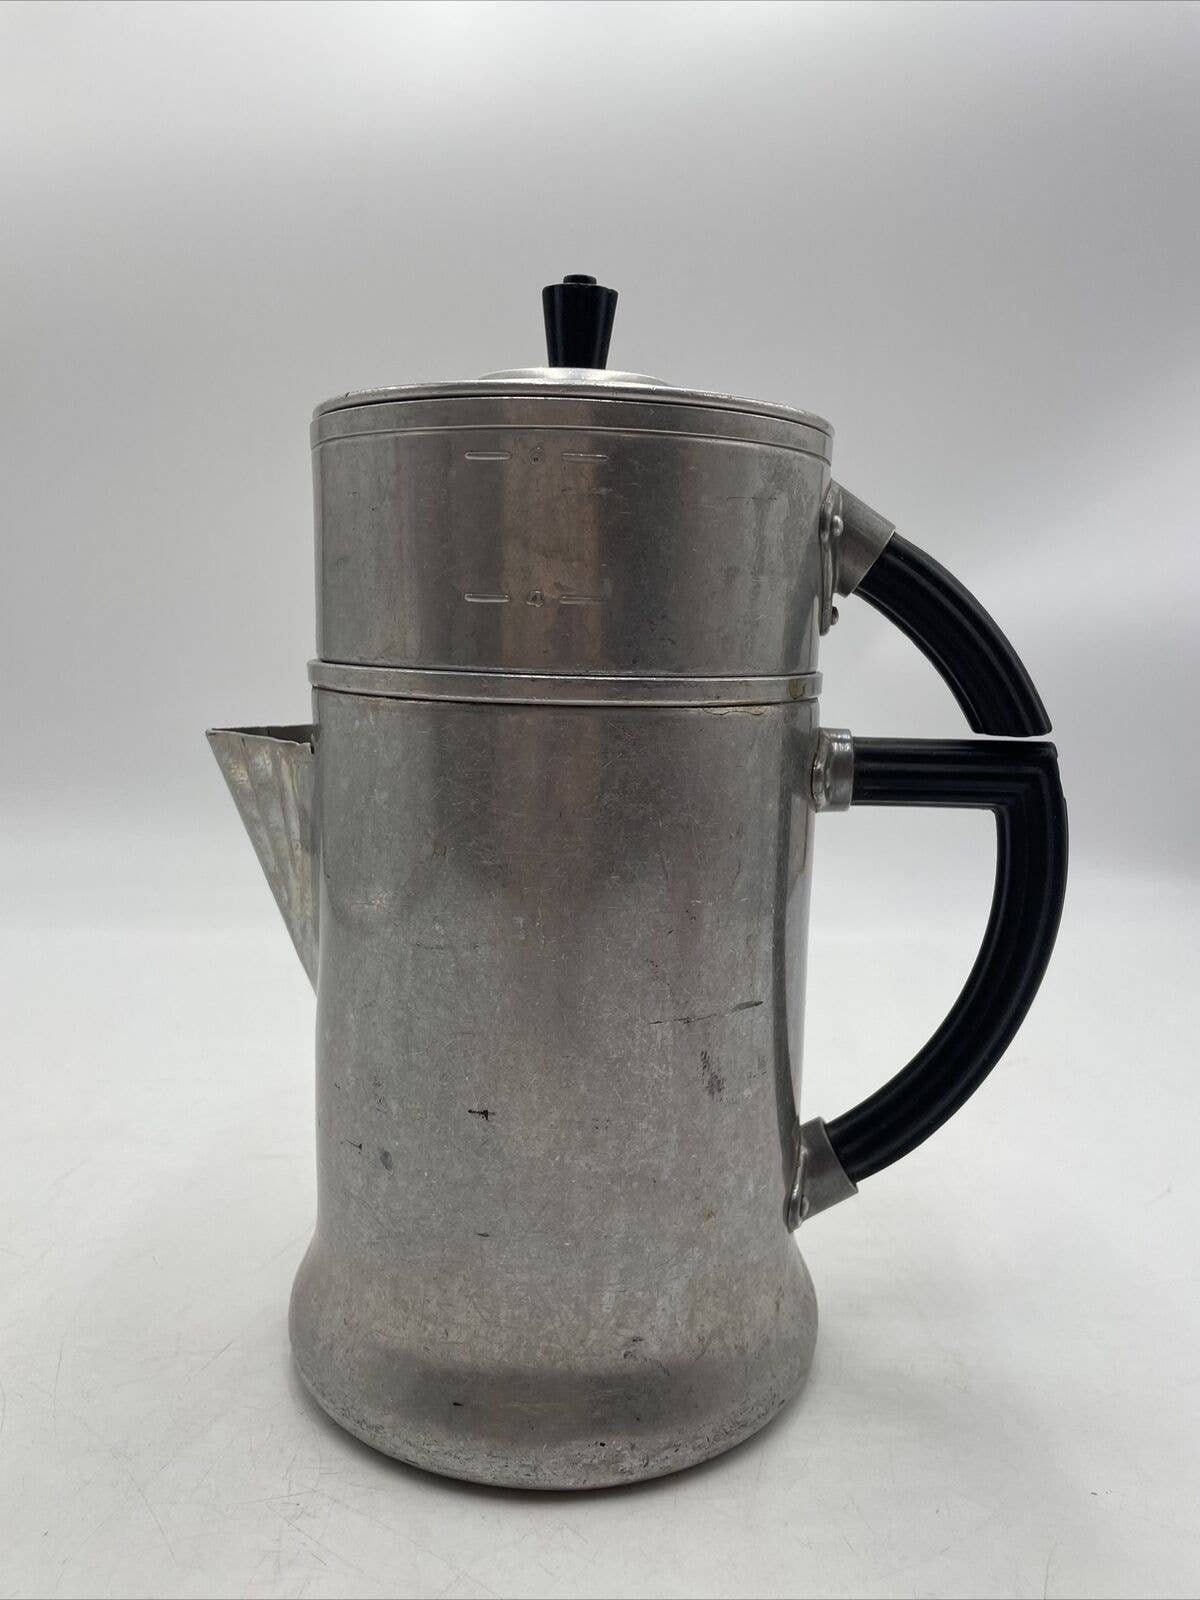 A Metal Antique Coffee Maker With Lid Stock Photo - Download Image